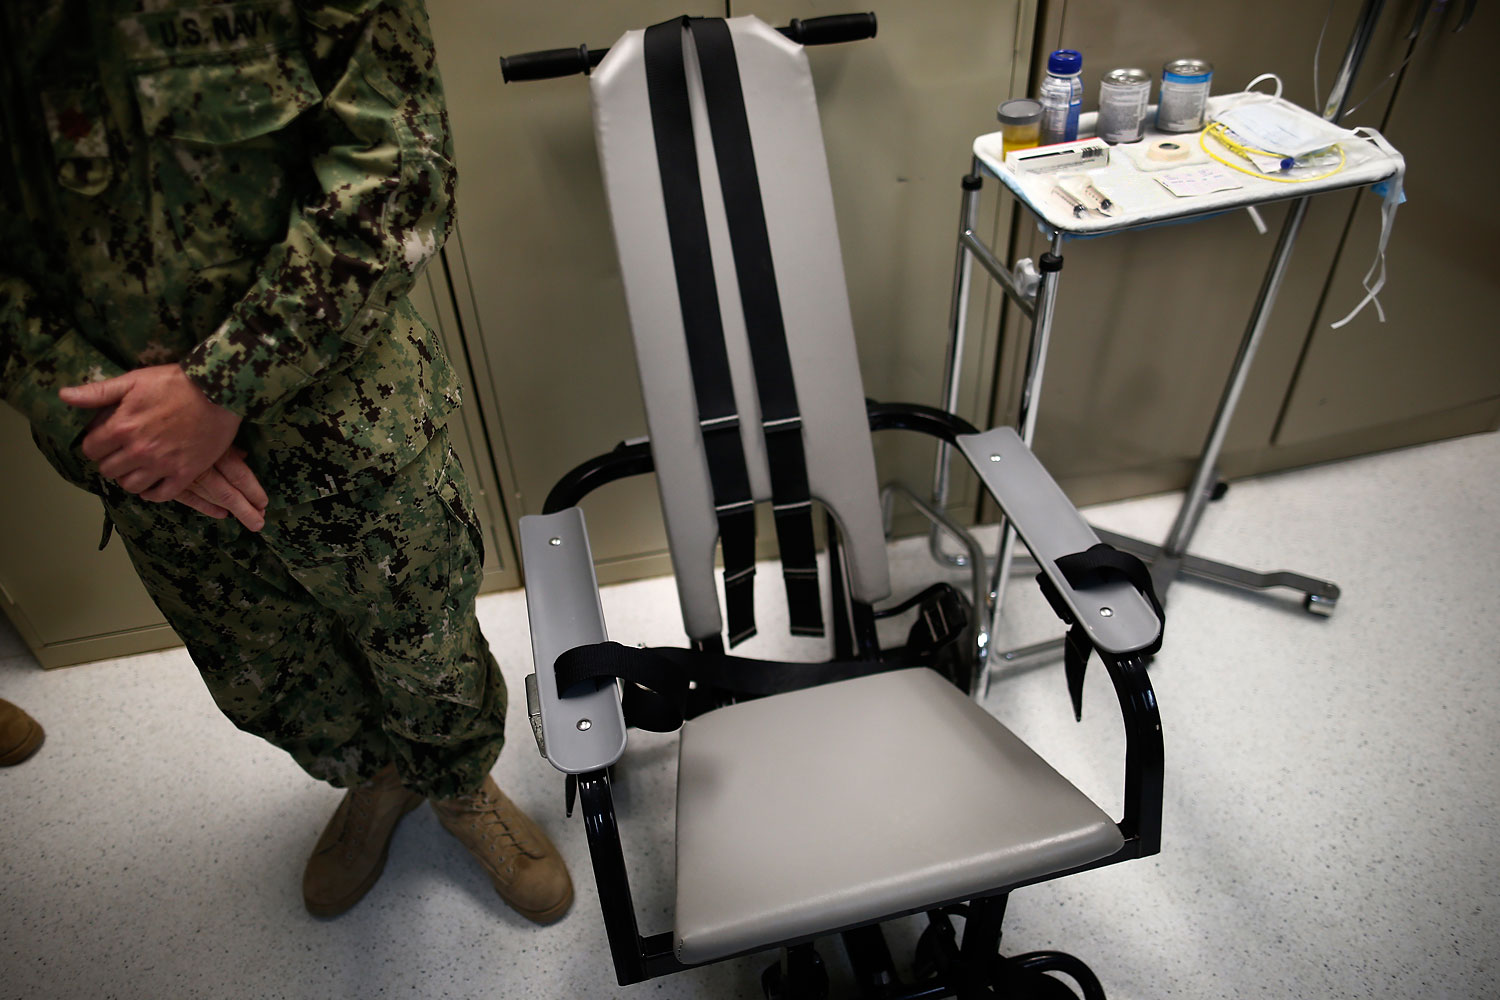 In this photo Nov. 20, 2013 file photo reviewed by the U.S. military, a U.S. Navy nurse stands next to a chair with restraints, used for force-feeding, and a tray displaying nutritional shakes, a tube for feeding through the nose, and lubricants, including a jar of olive oil, during a tour of the detainee hospital at Guantanamo Bay Naval Base in Cuba. (Charles Dharapak—AP)